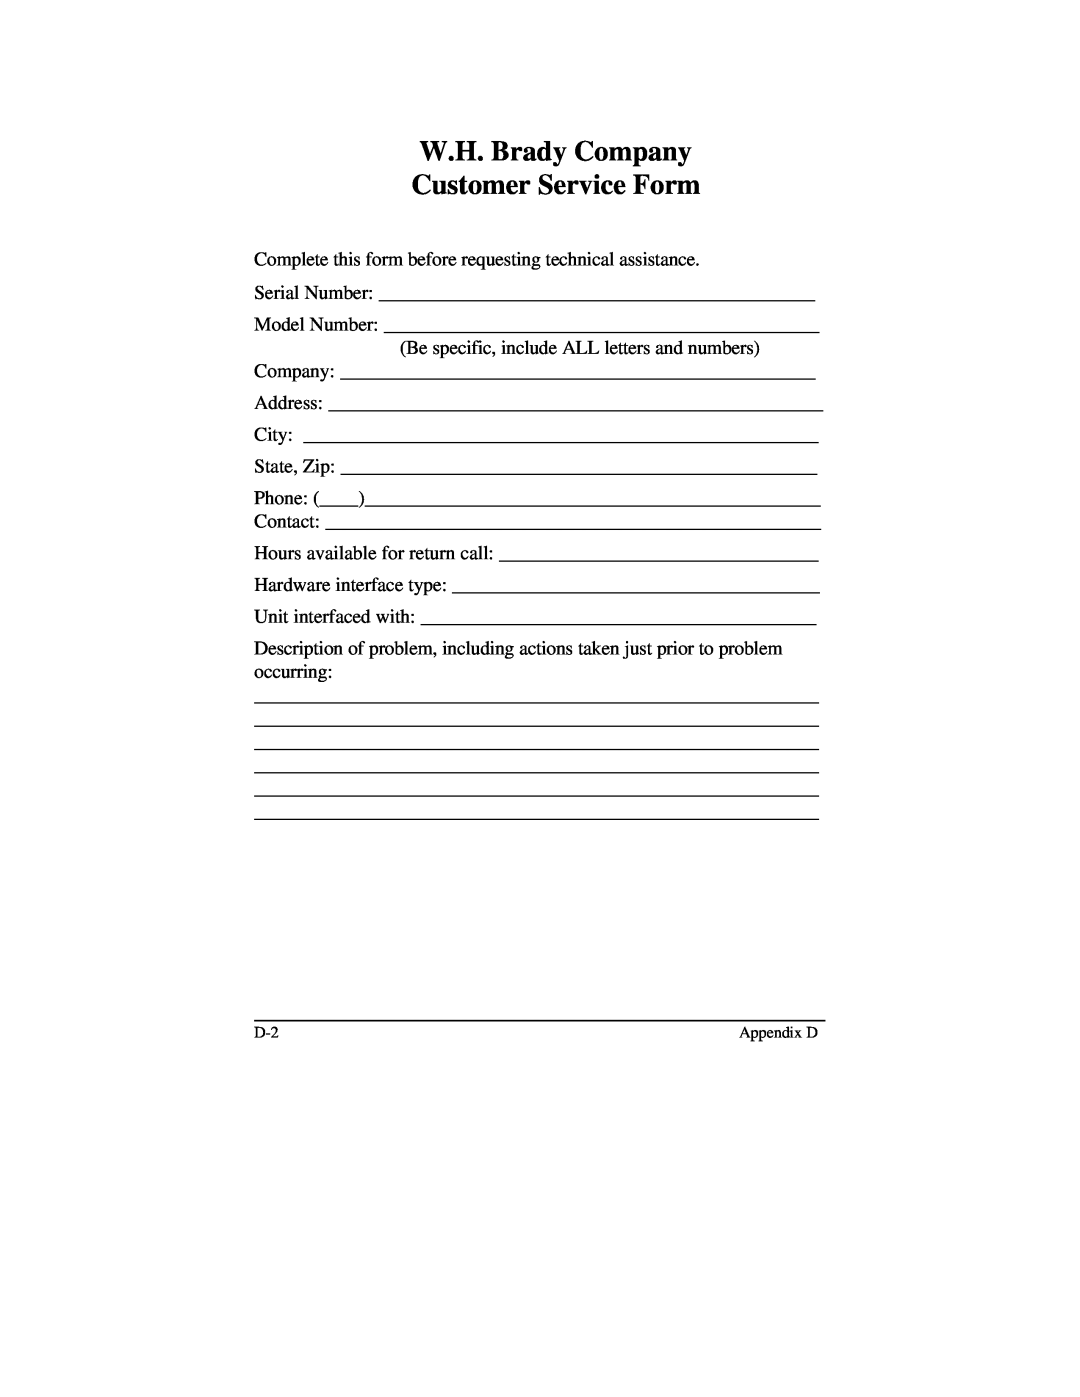 Brady 2024, 2034 manual W.H. Brady Company Customer Service Form, Complete this form before requesting technical assistance 